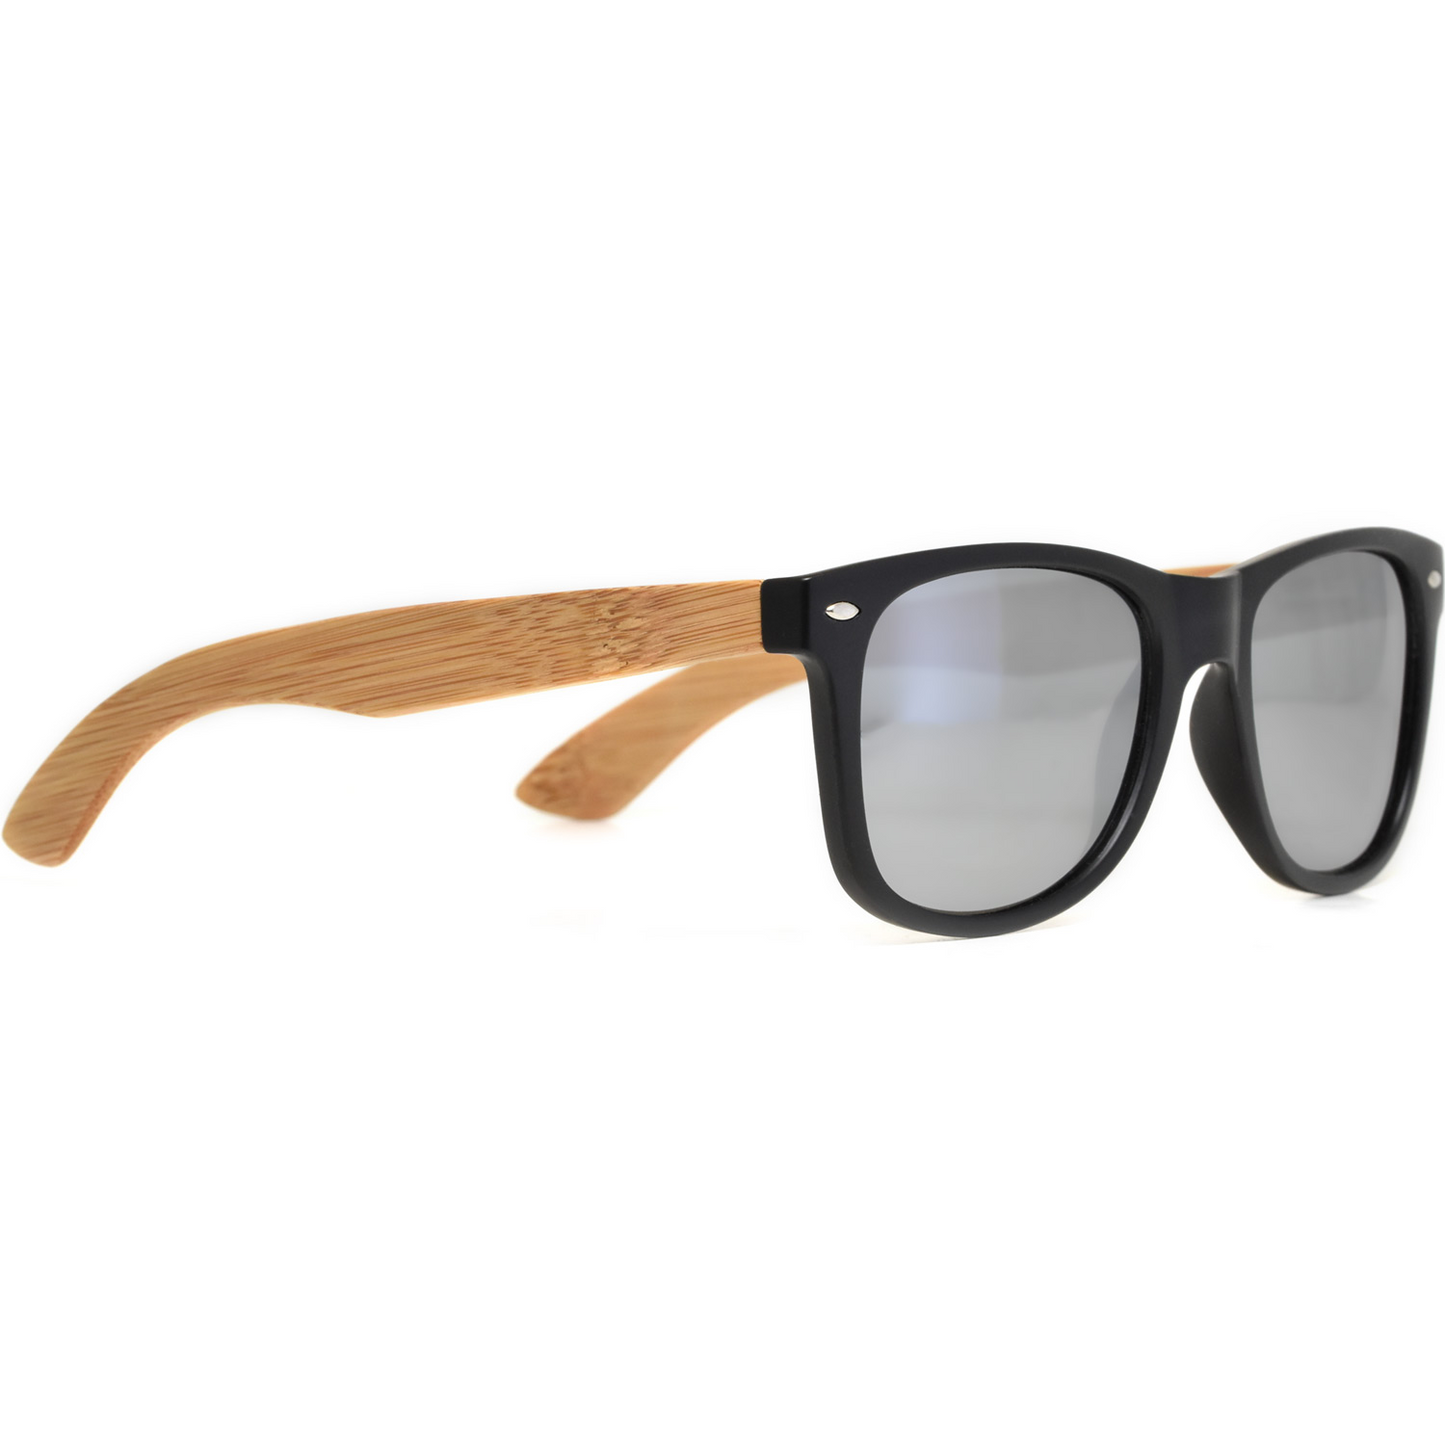 Bamboo wood classic style sunglasses with silver mirrored polarized lenses